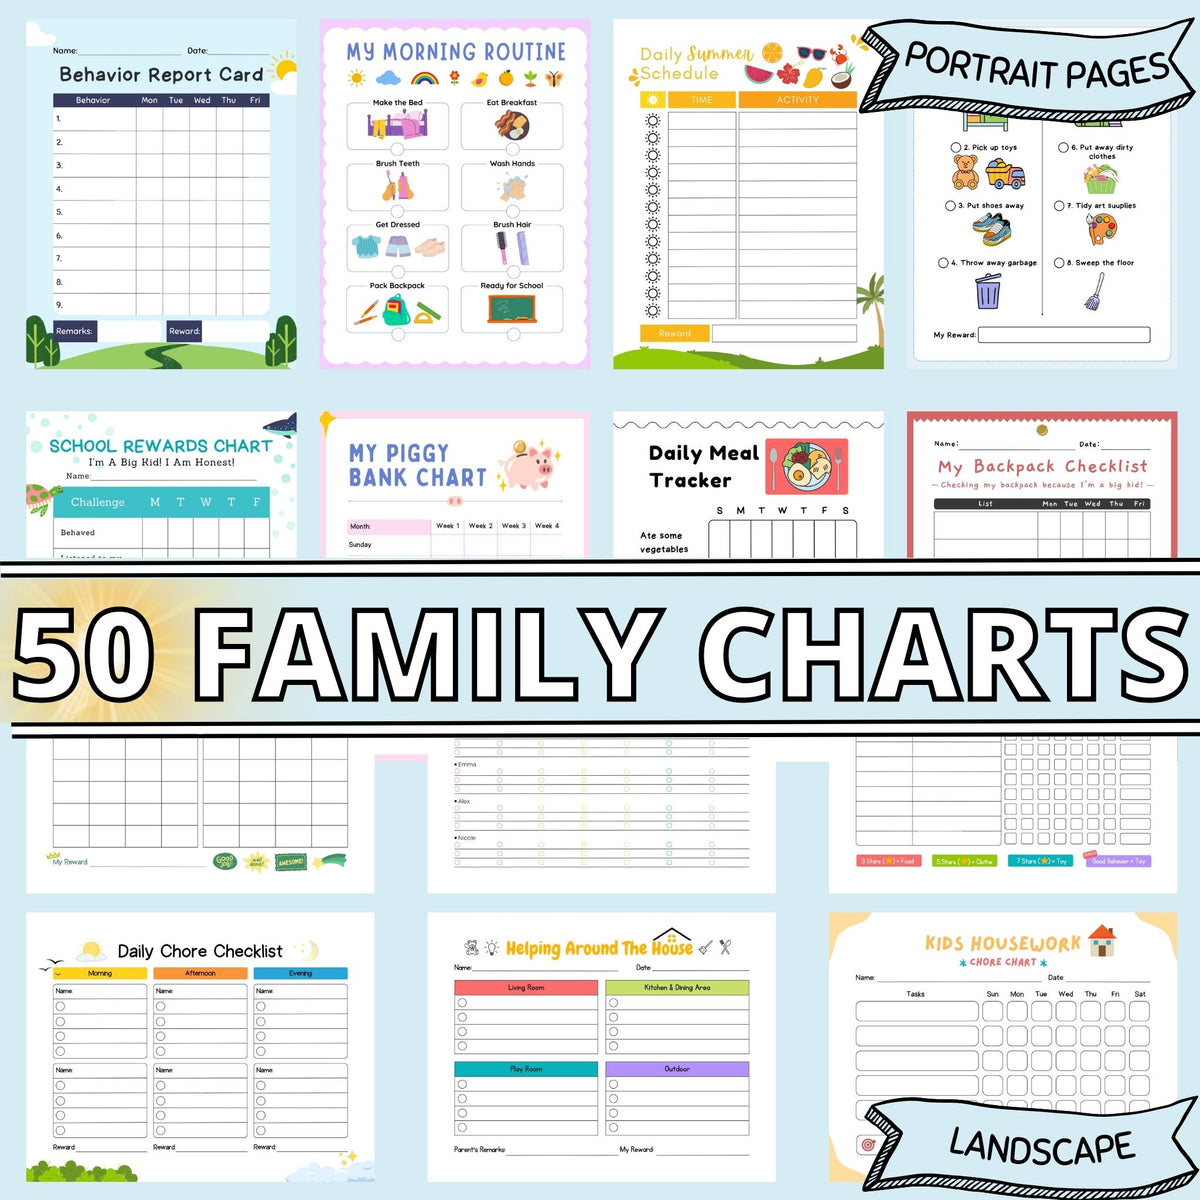 14 poster charts of various household chores, checklists and other organisational tasks for children, complete with playful illustrations, against a light blue background.